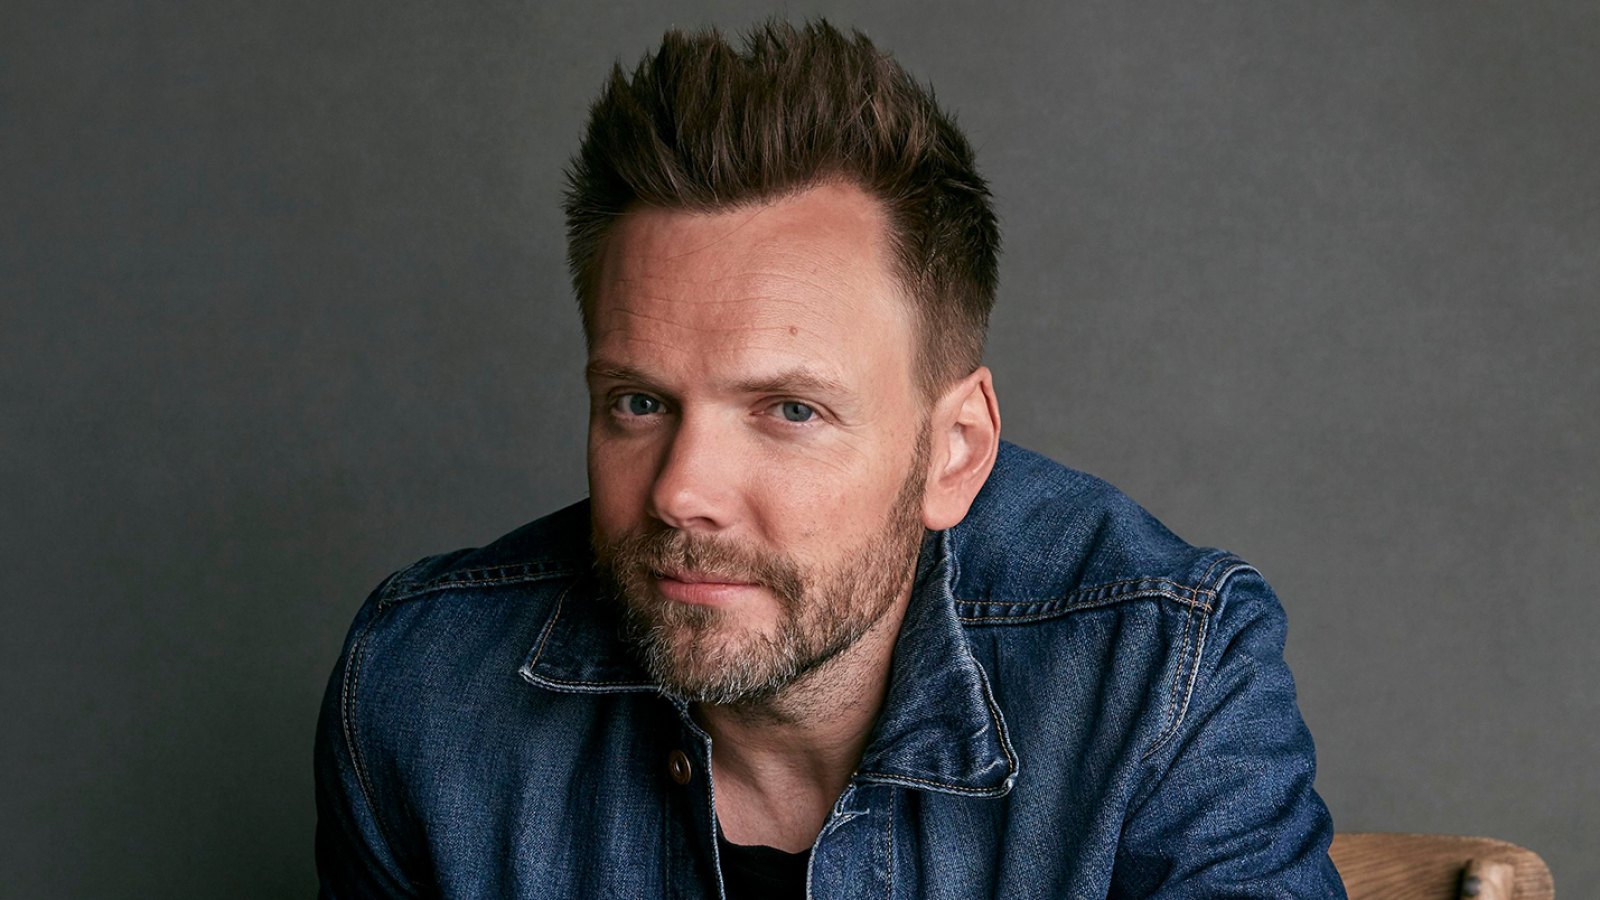 Joel McHale: 25 Things You Don’t Know About Me